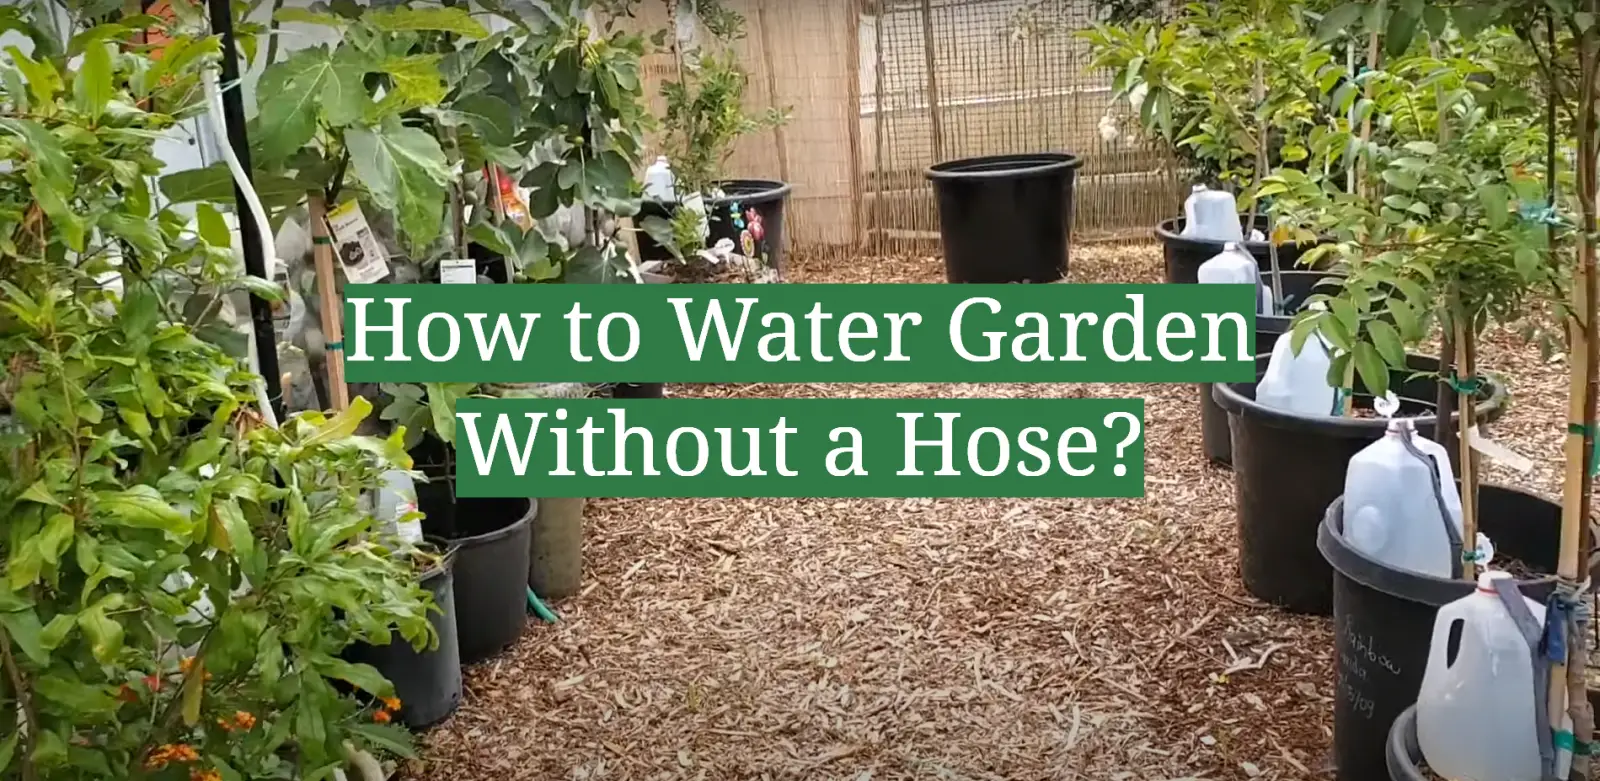 How to Water Garden Without a Hose?